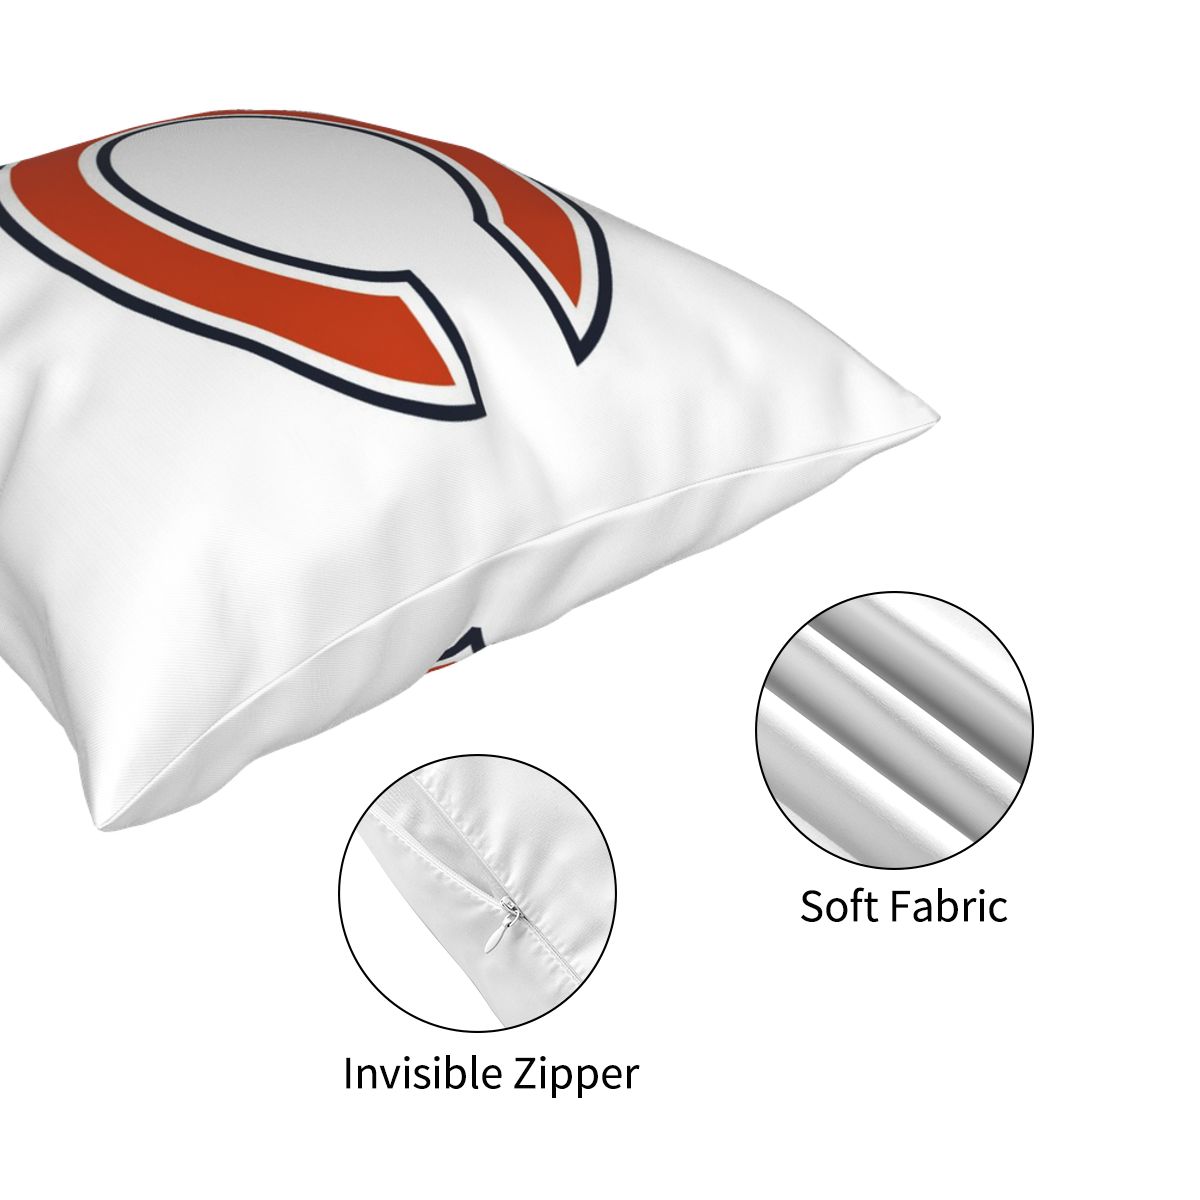 Custom Decorative Football Pillow Case Chicago Bears White Pillowcase Personalized Throw Pillow Covers